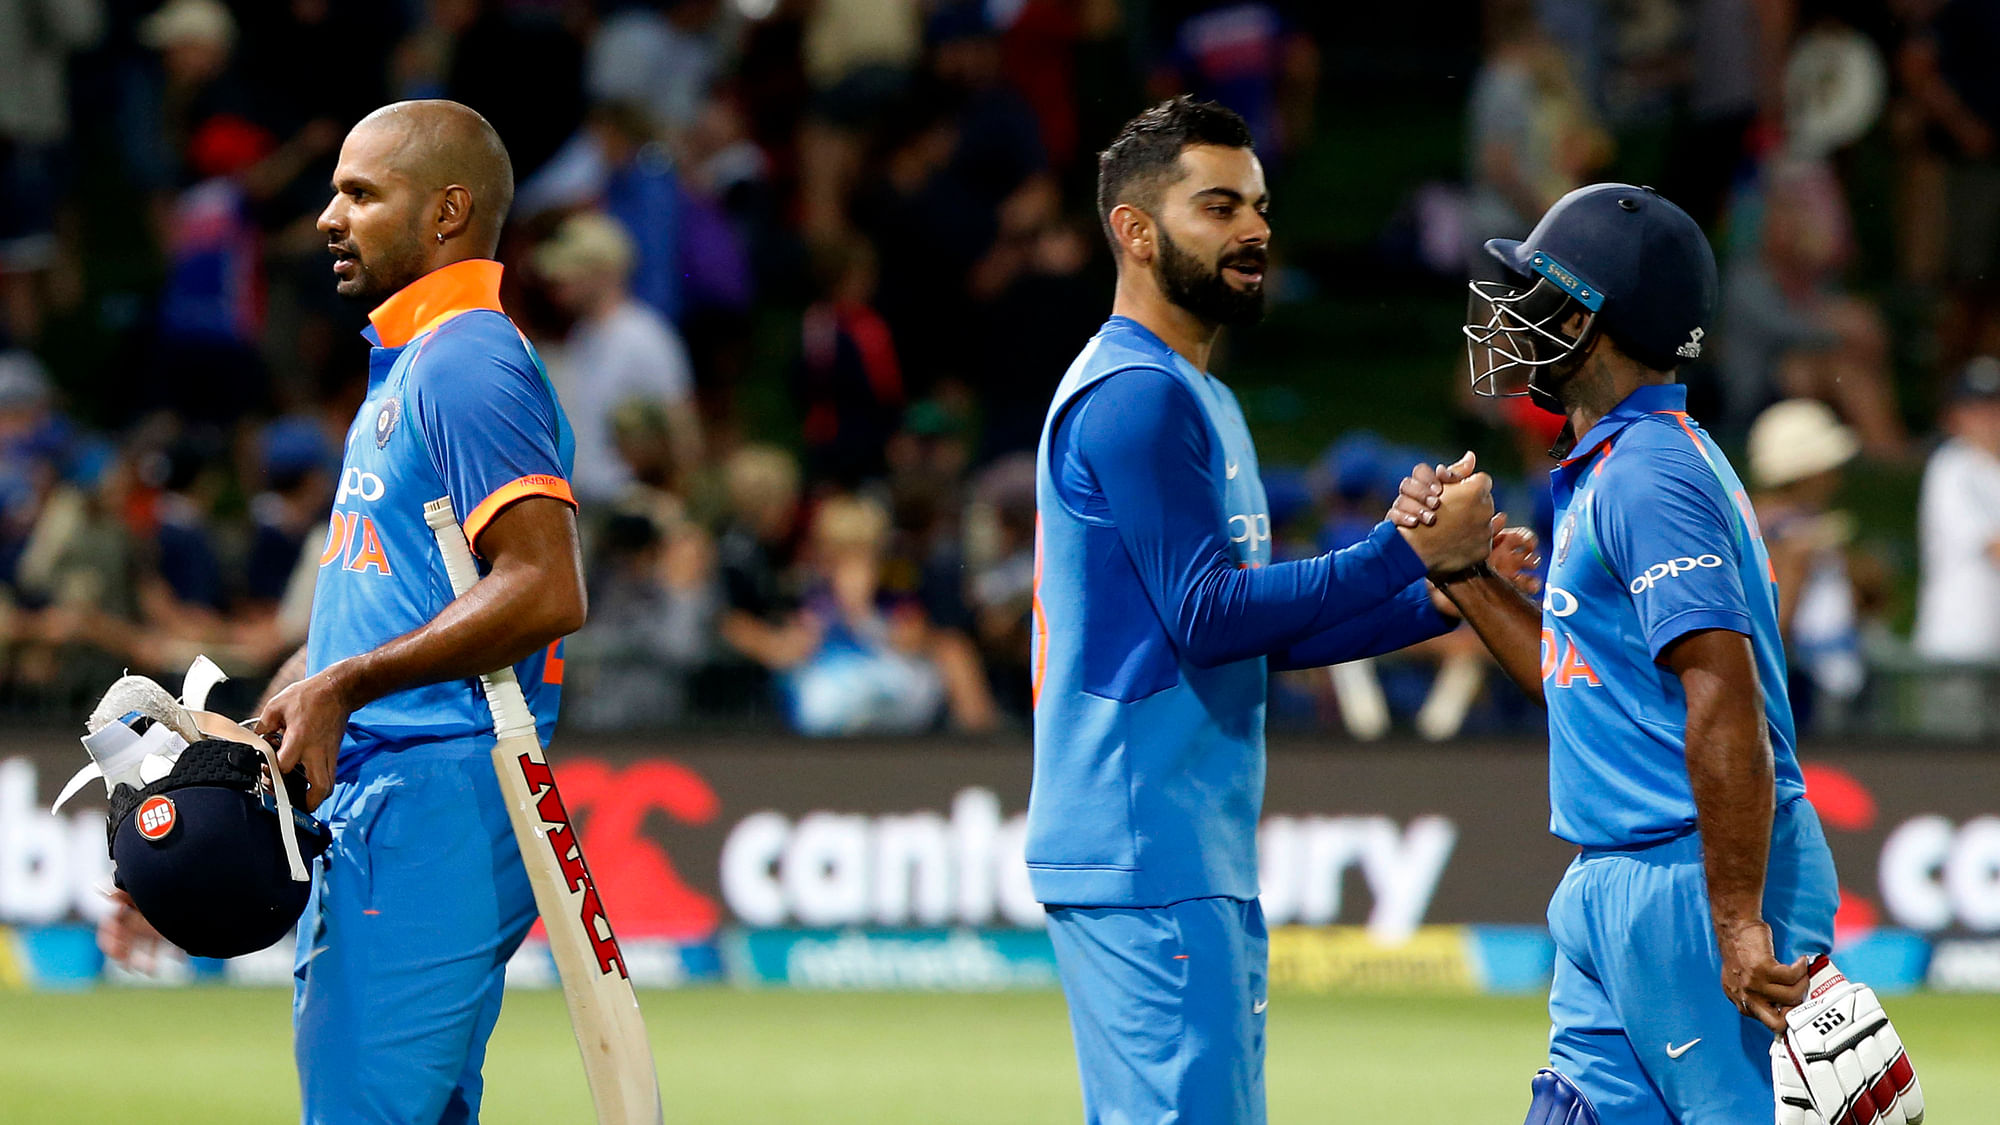 India coasted to an 8-wicket win in their ODI series opener against New Zealand at Napier.